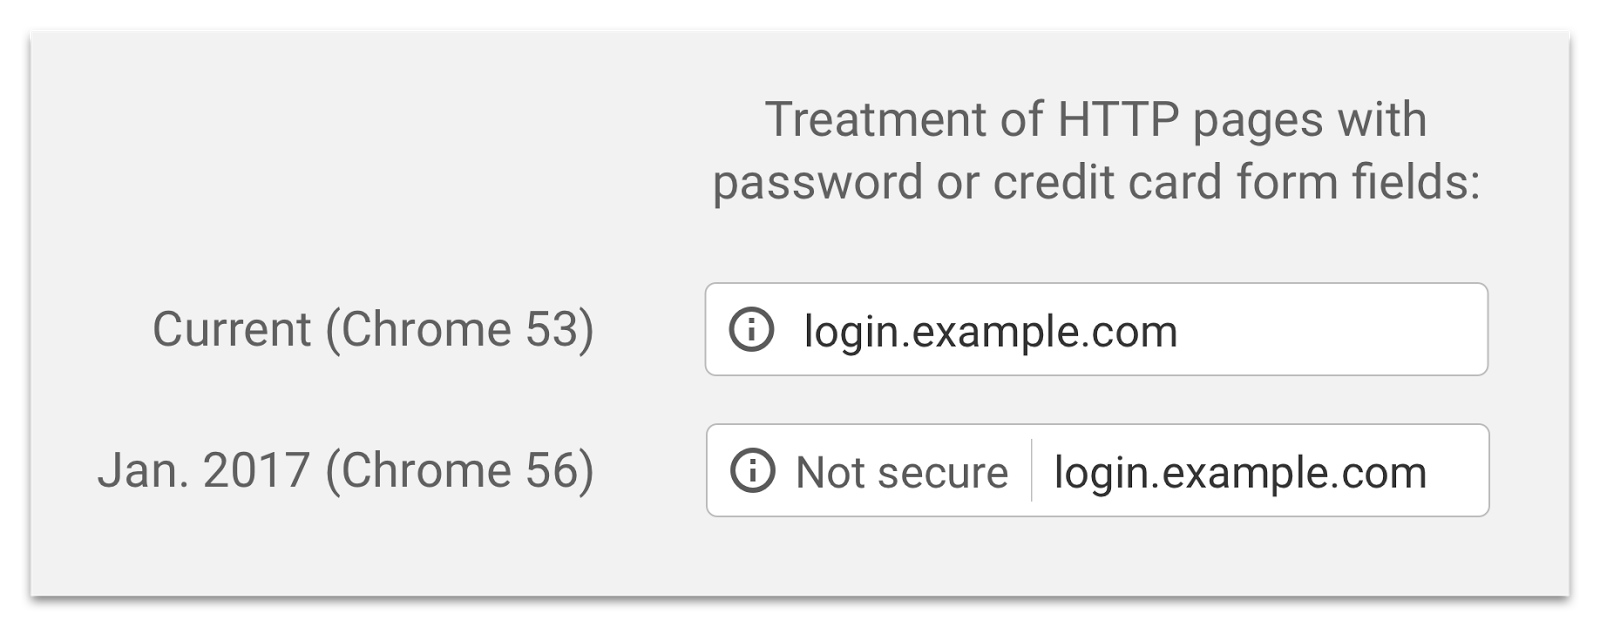 Treatment of HTTP pages with password or credit card form fields in Chrome 56